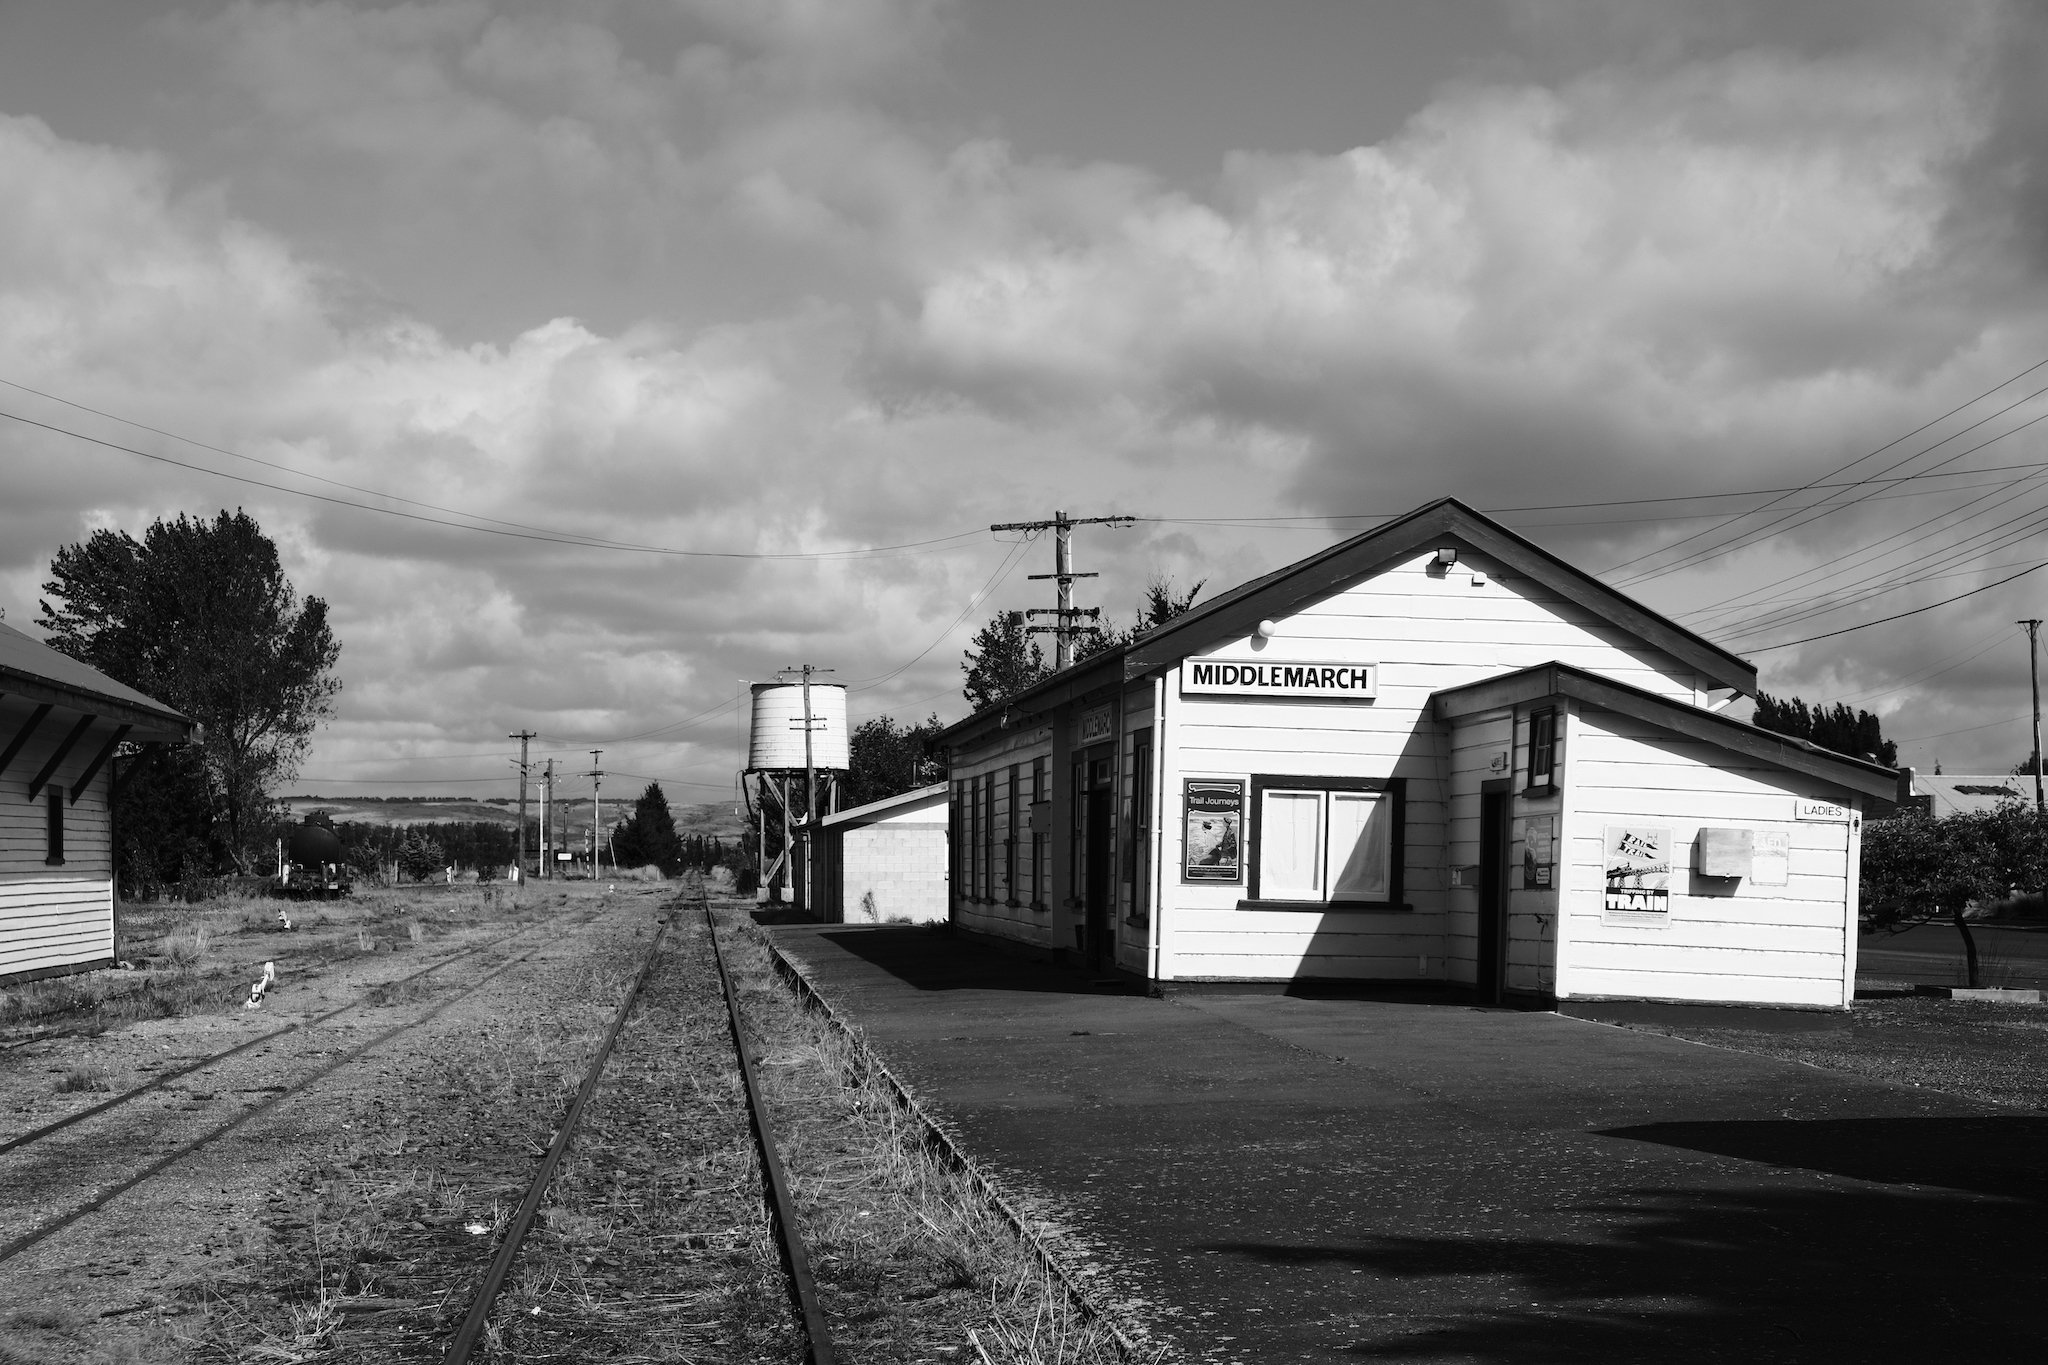 Middlemarch Station